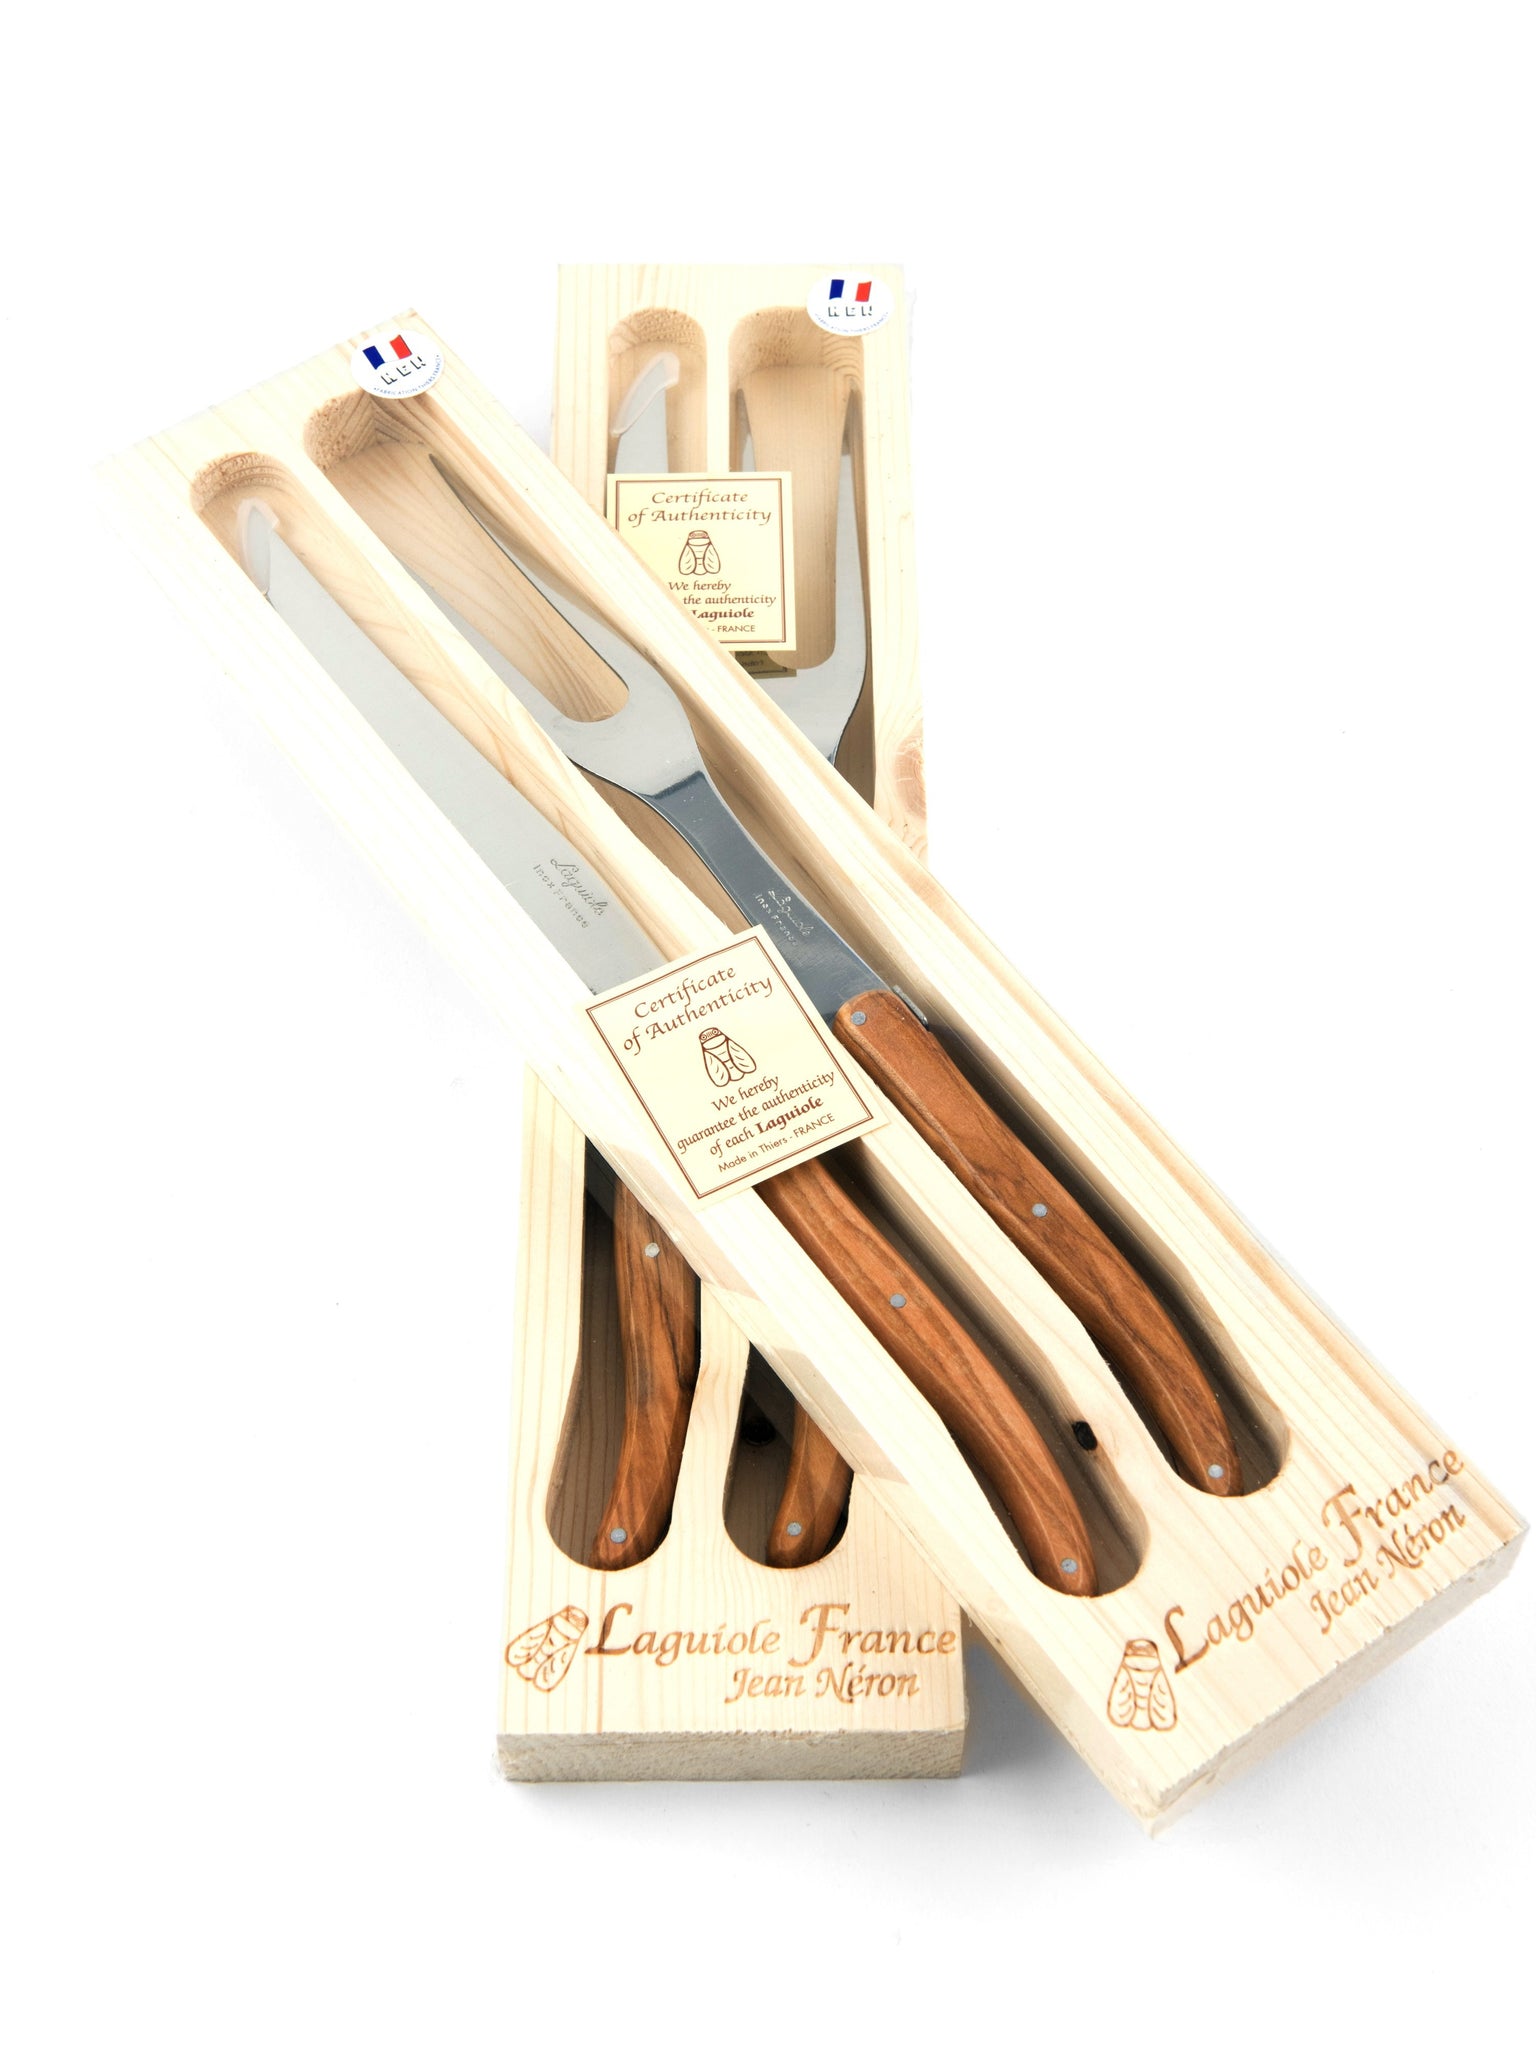 Laguiole French Olivewood Carving Set in Wood Box (Carving Knife and Carving Fork) - French Dry Goods